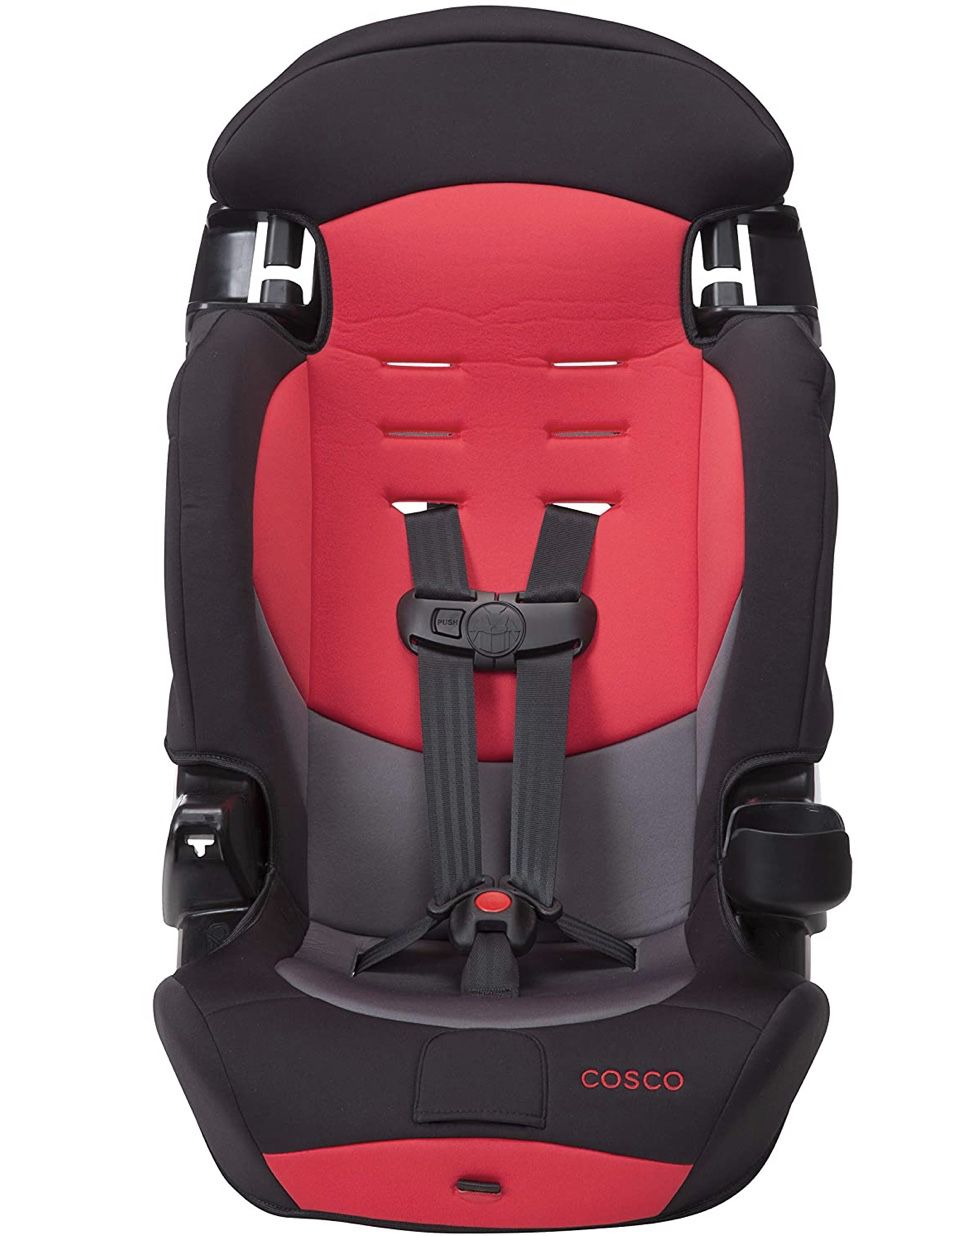 New Cosco Finale DX 2-in-1 Combination Booster Car Seat SUMMERLIN